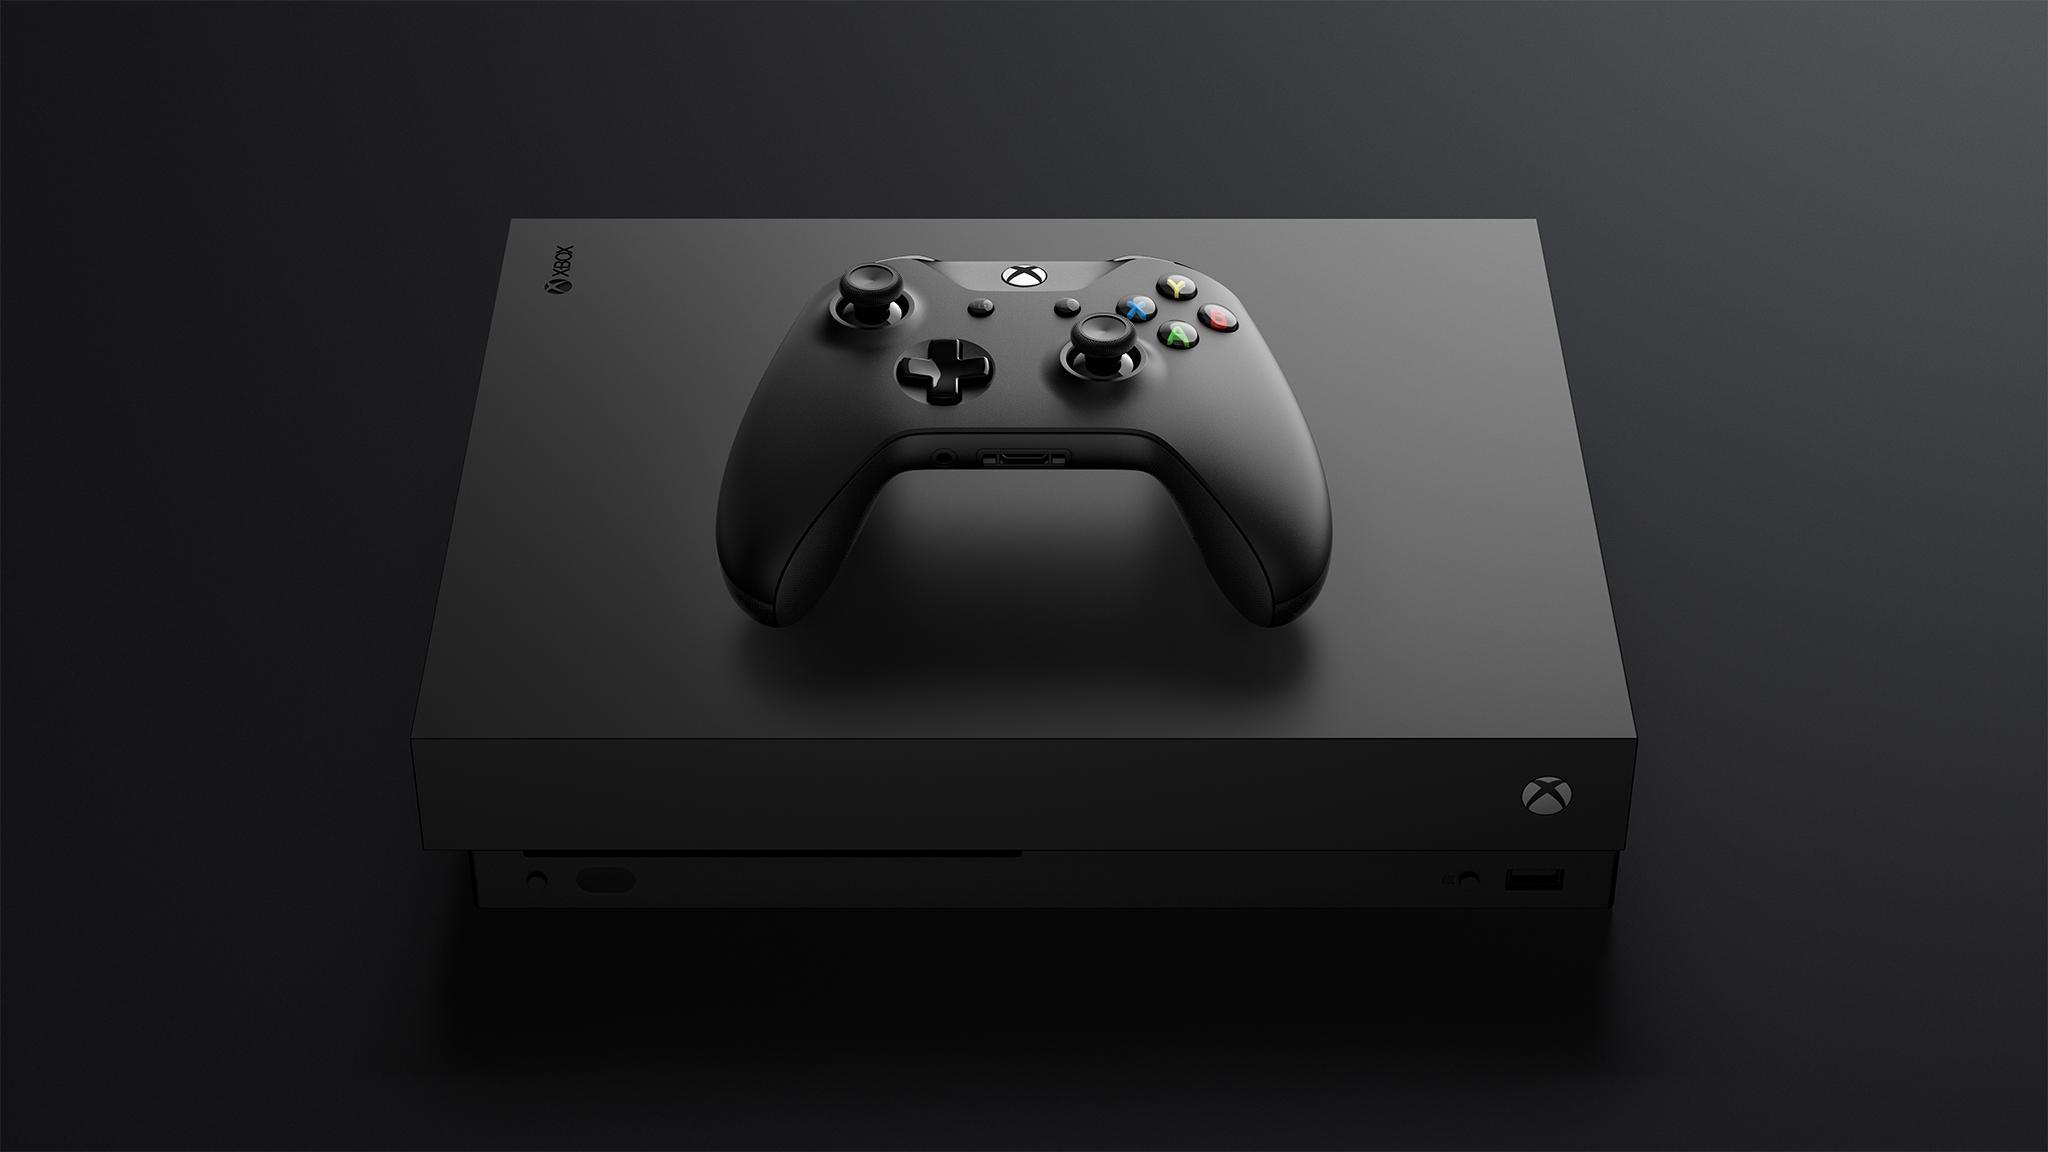 The new Xbox One update lets viewers take control of streamers’ games for kicks